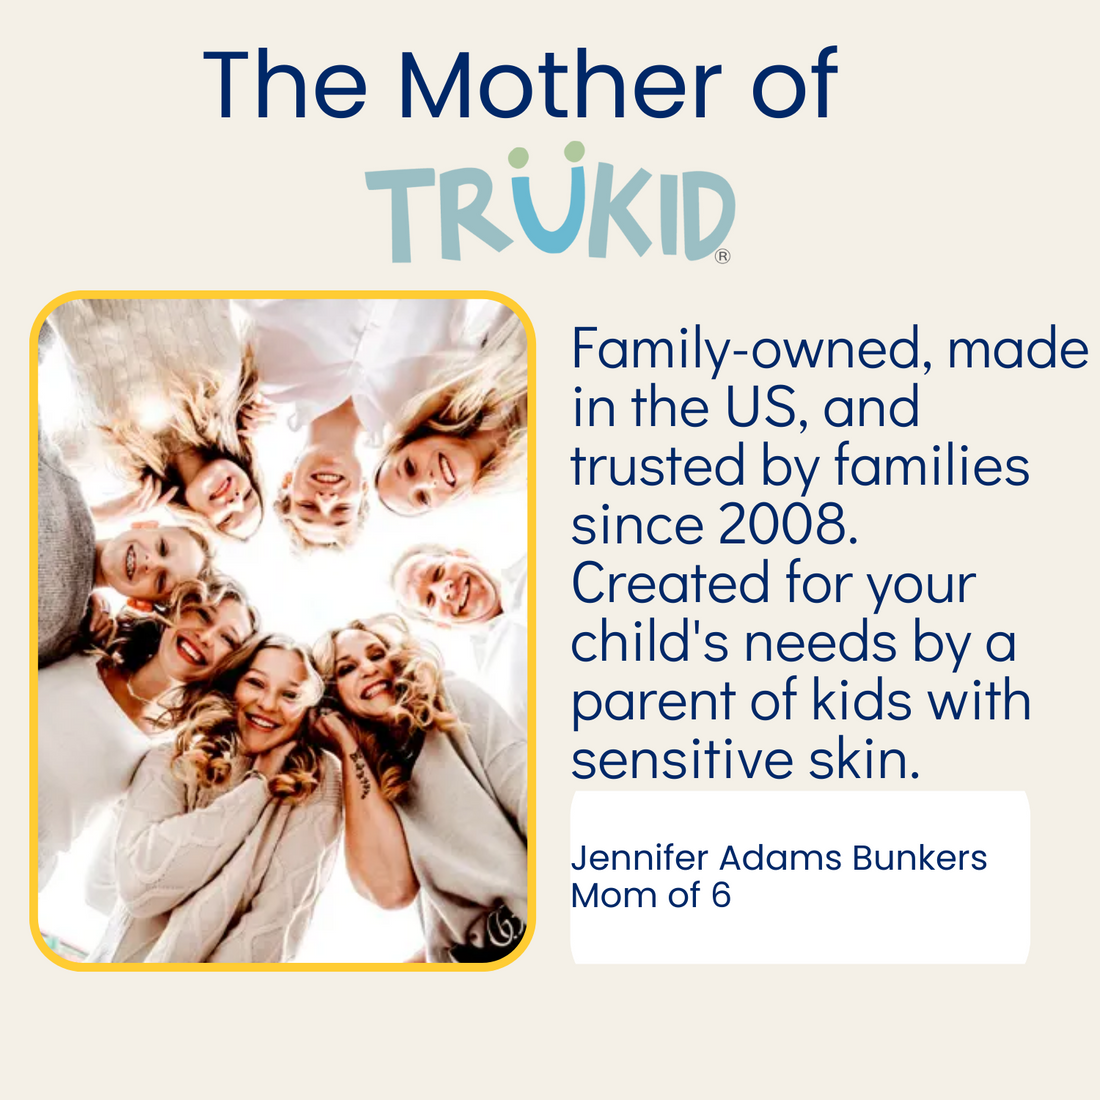 TruKid SPF30 Sunscreen Family-owned and trusted since 2008.